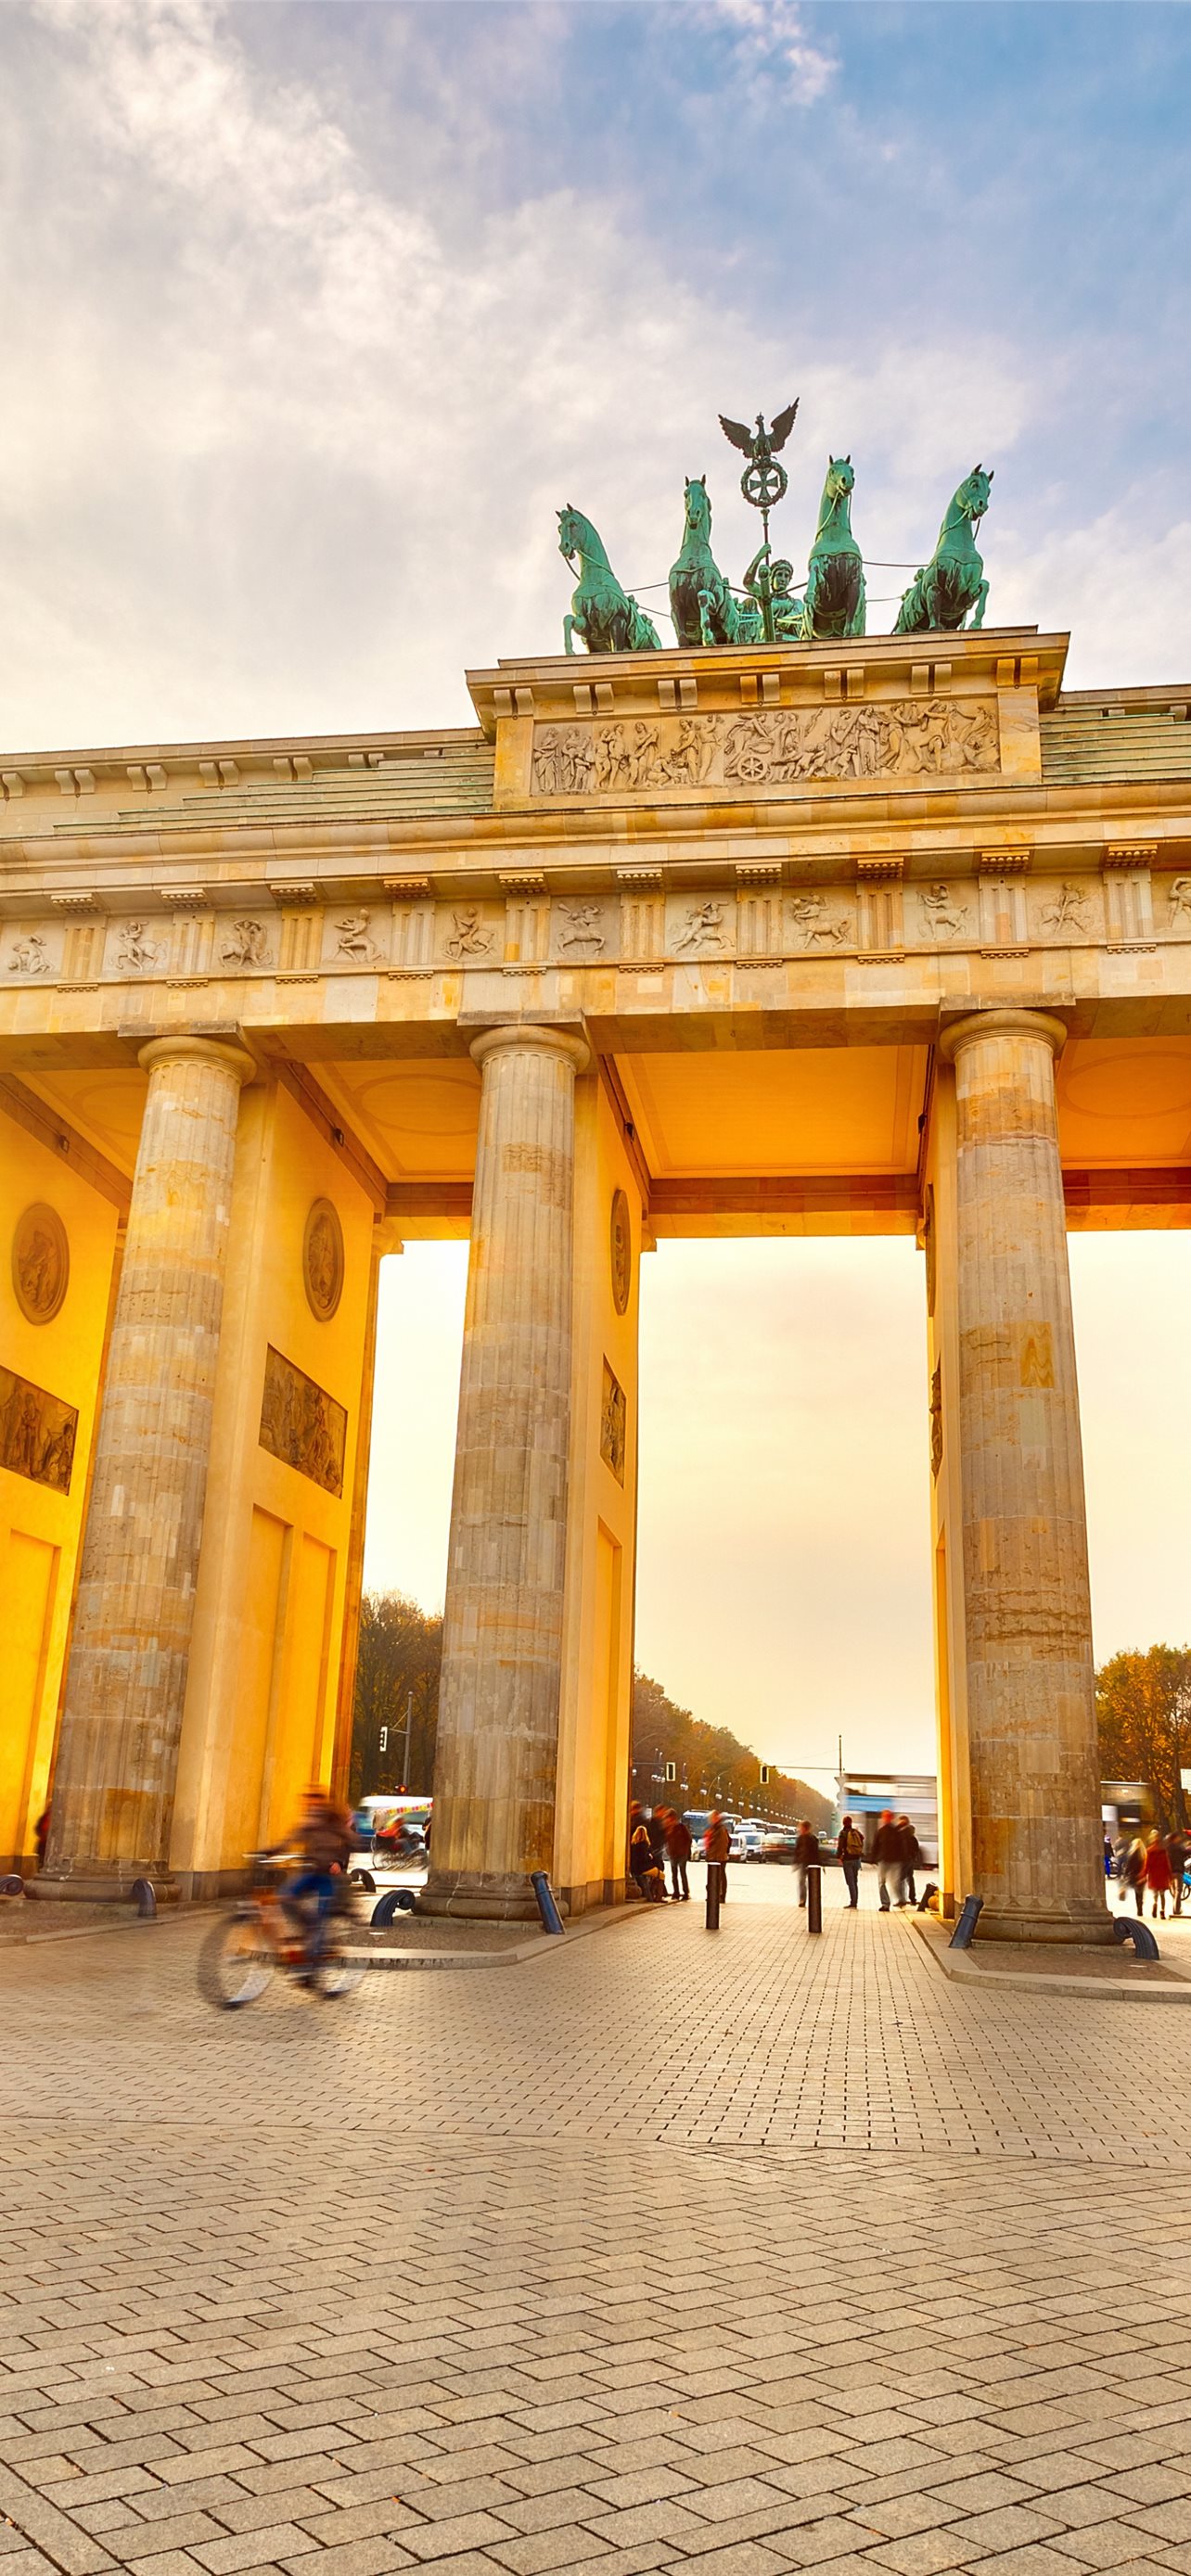 Mobile wallpaper: Cities, Berlin, City, Germany, Man Made, 1123324 download  the picture for free.